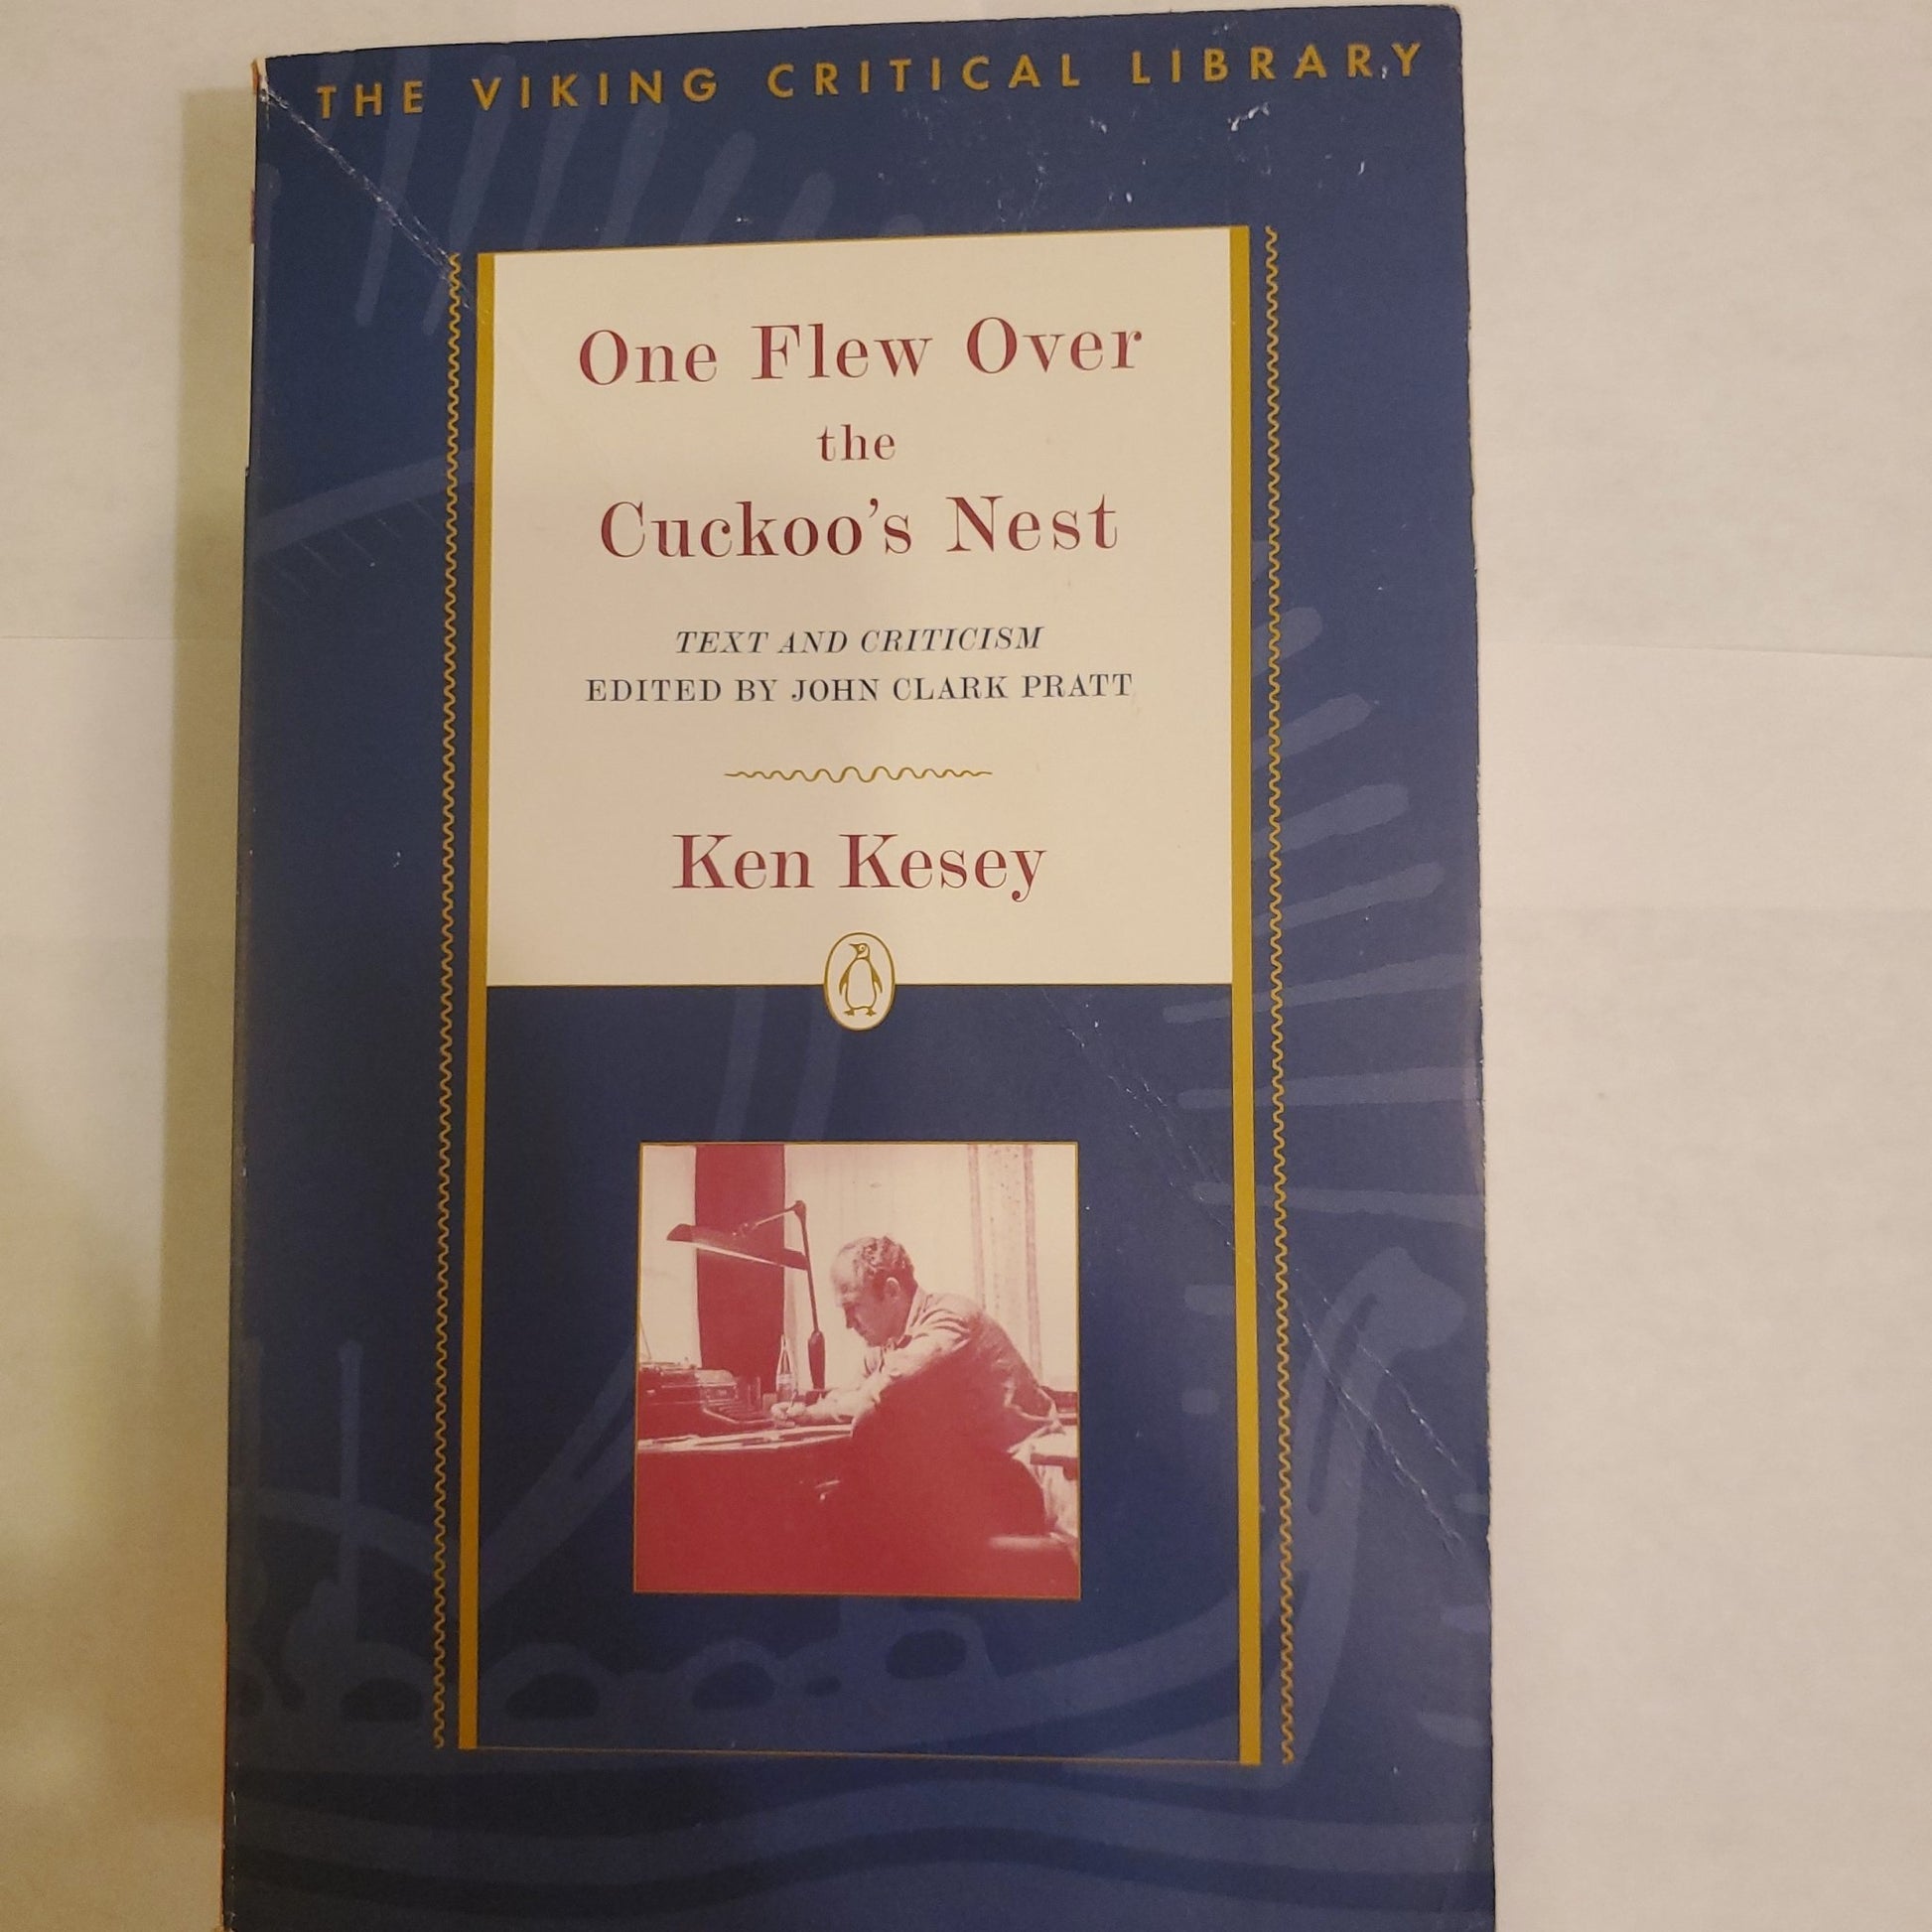 One Flew Over the Cuckoo's Nest - [ash-ling] Booksellers